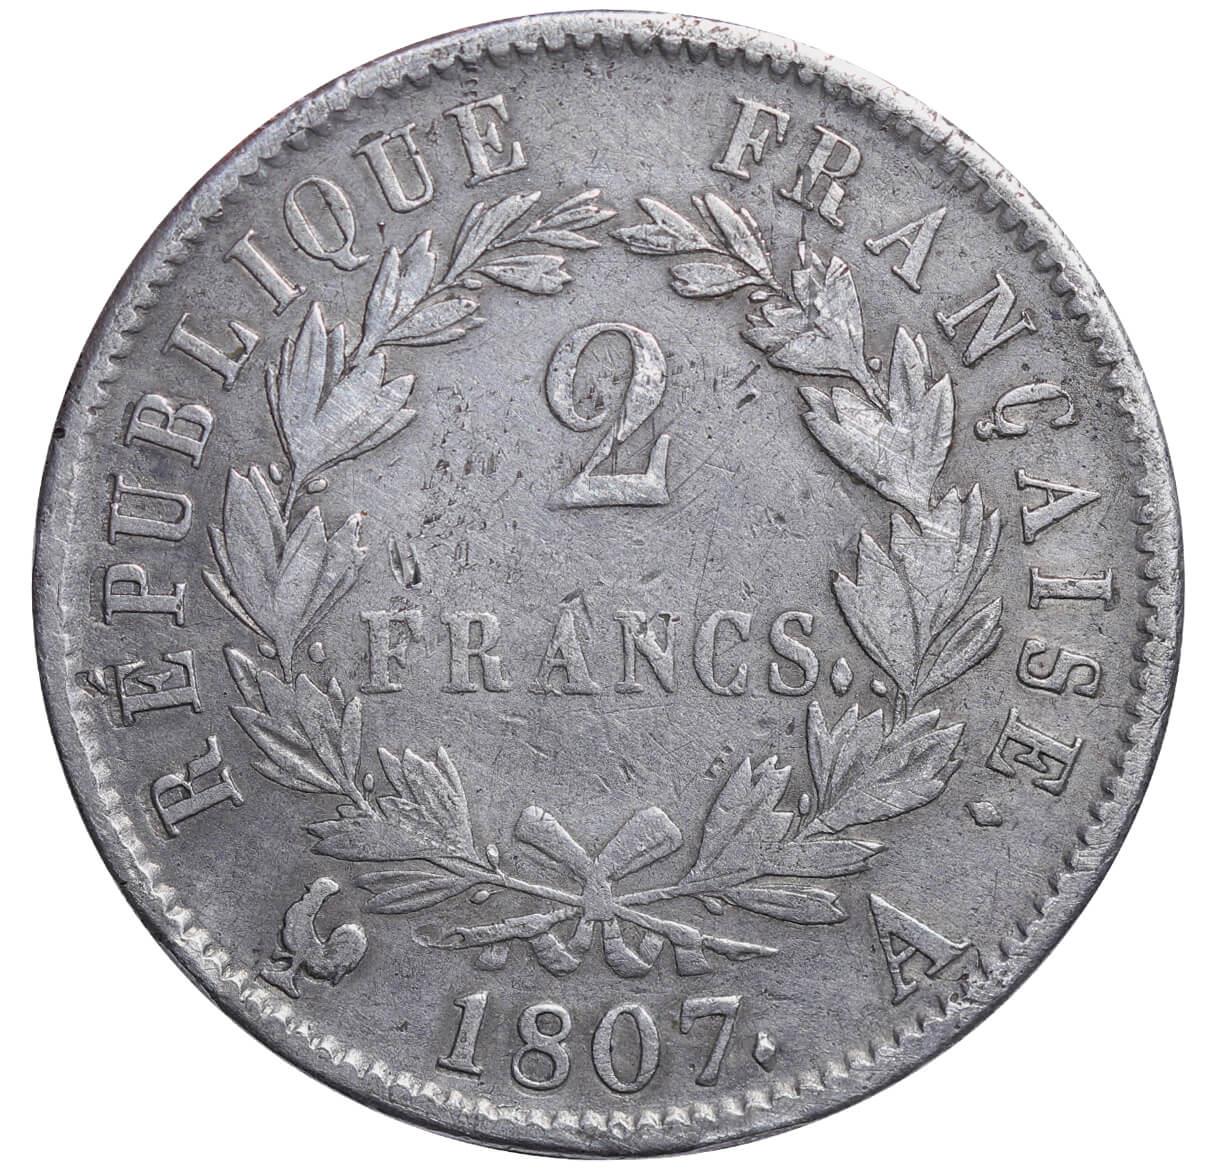 France, 2 Francs, 1807 year, A - Image 3 of 3